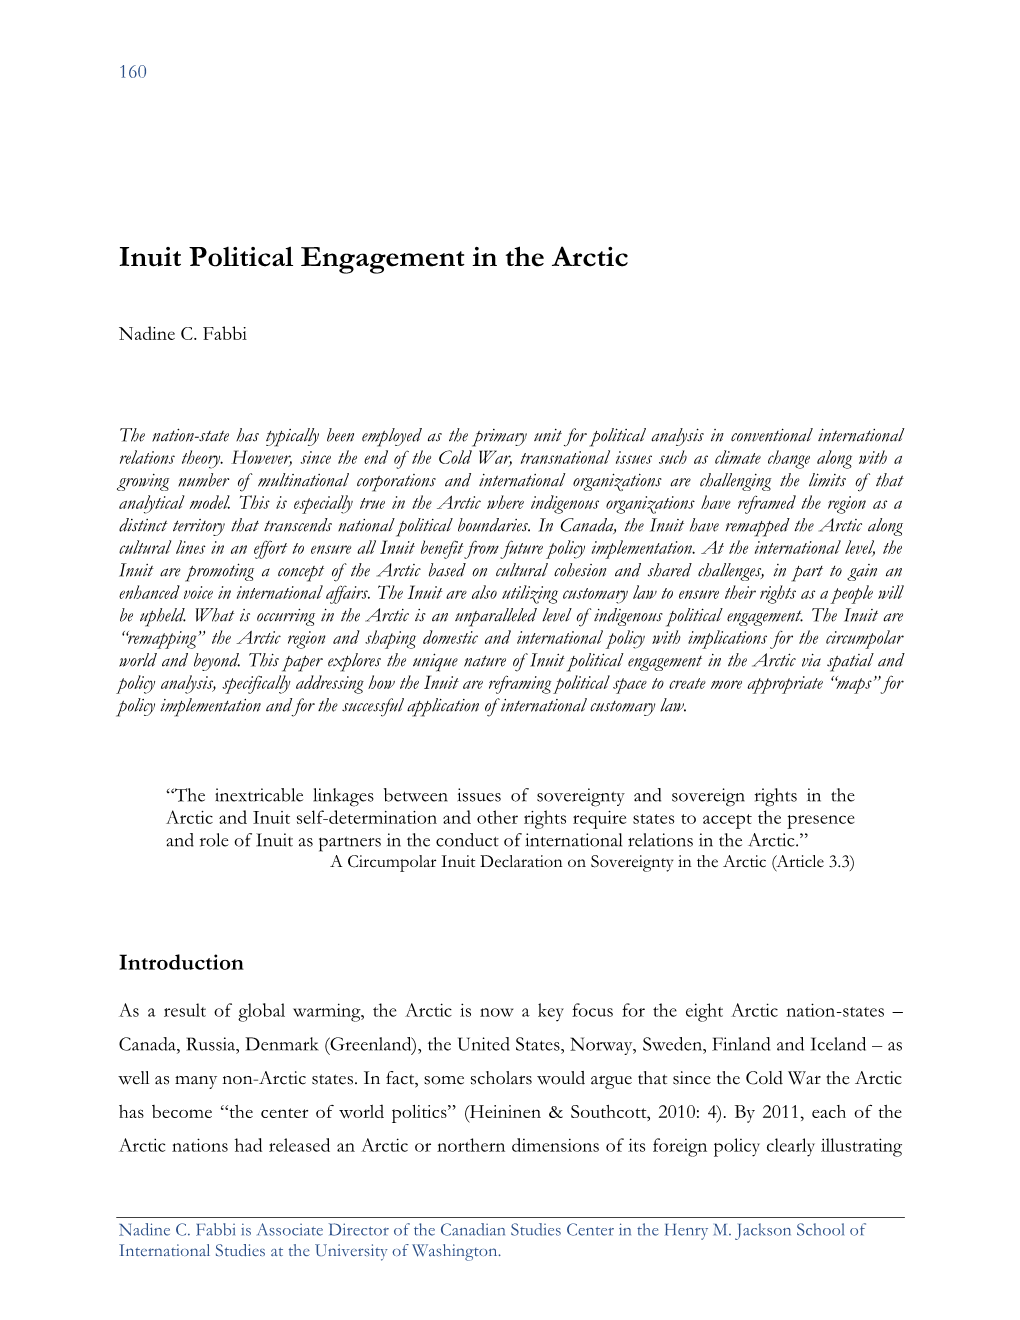 Inuit Political Engagement in the Arctic